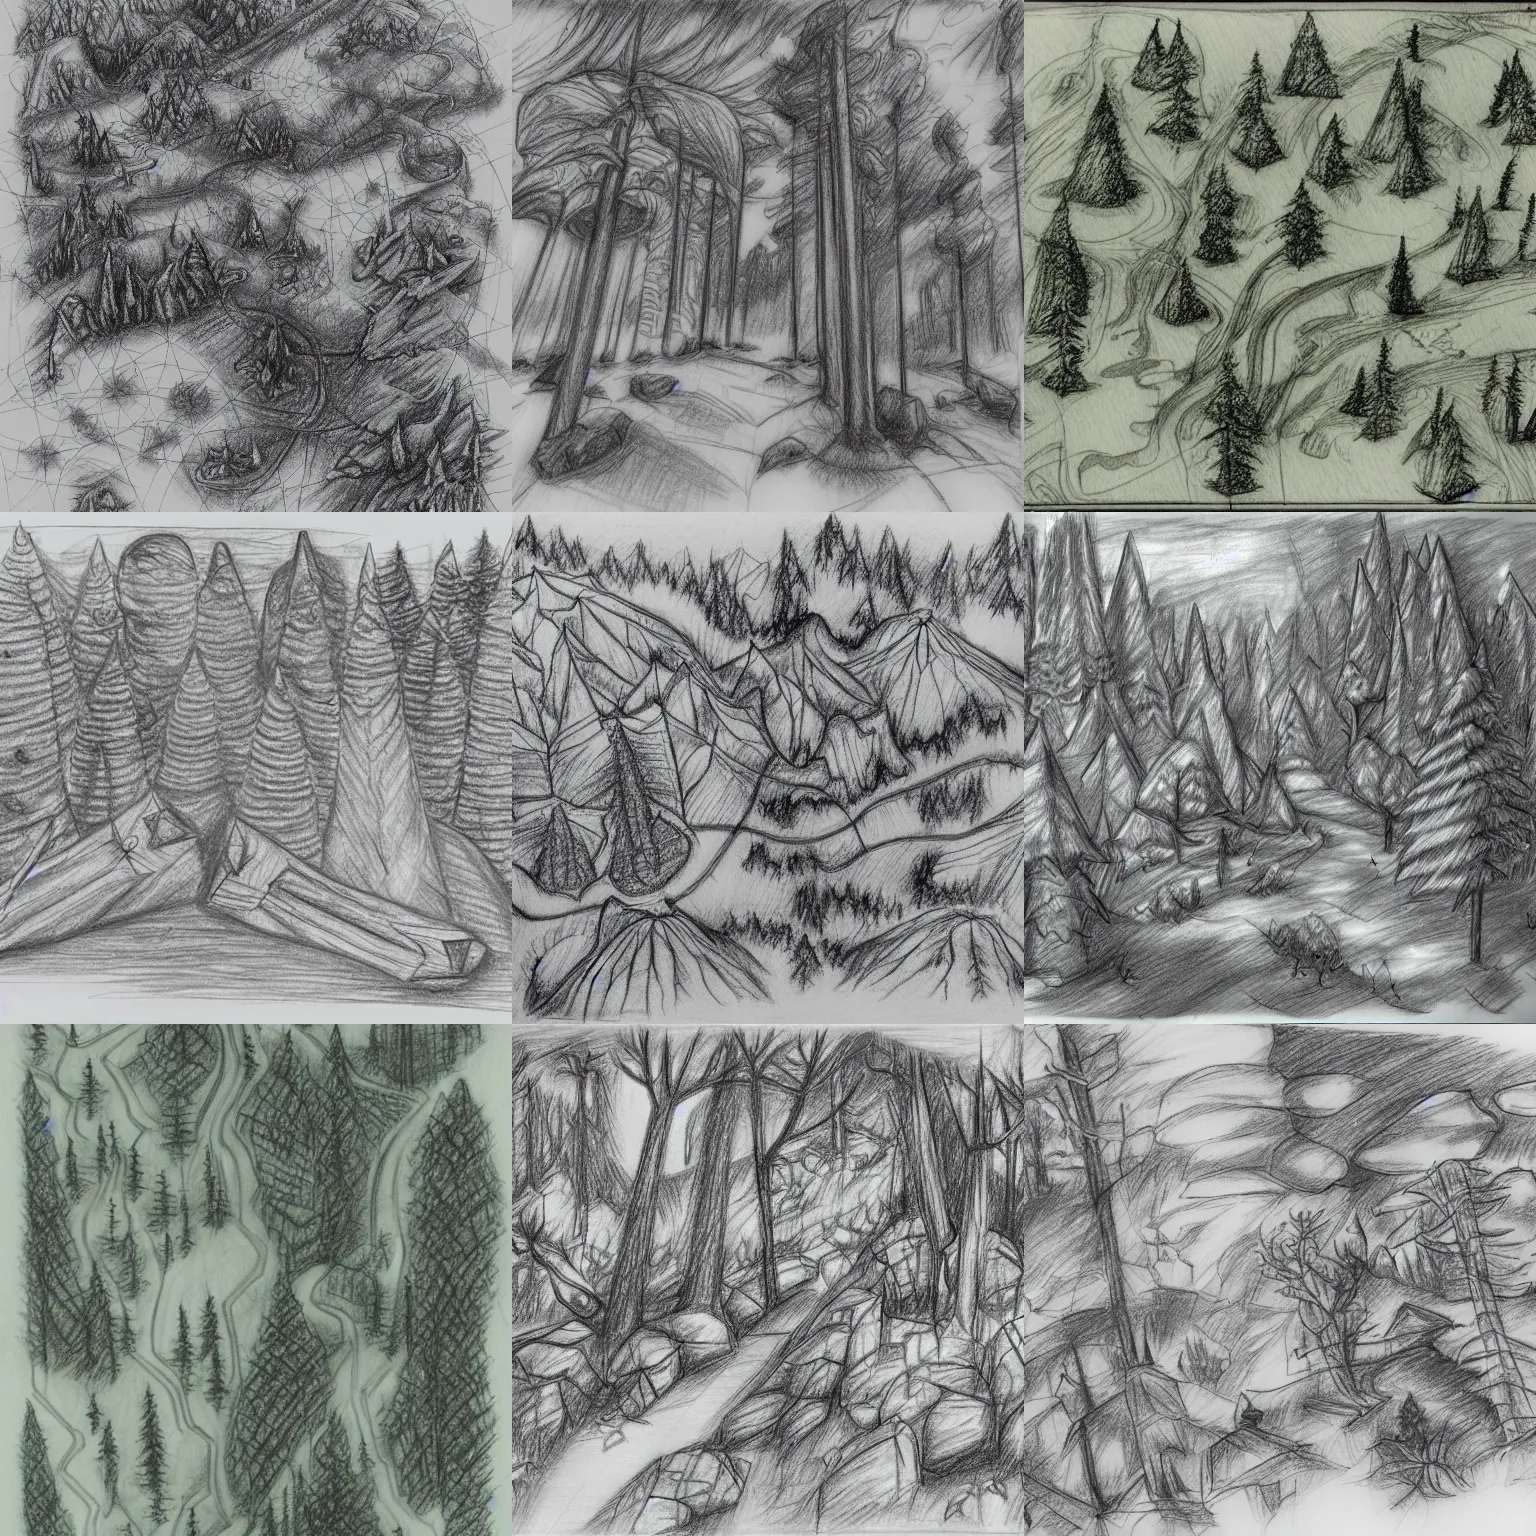 19746 Pencil Sketch Forest Images Stock Photos  Vectors  Shutterstock